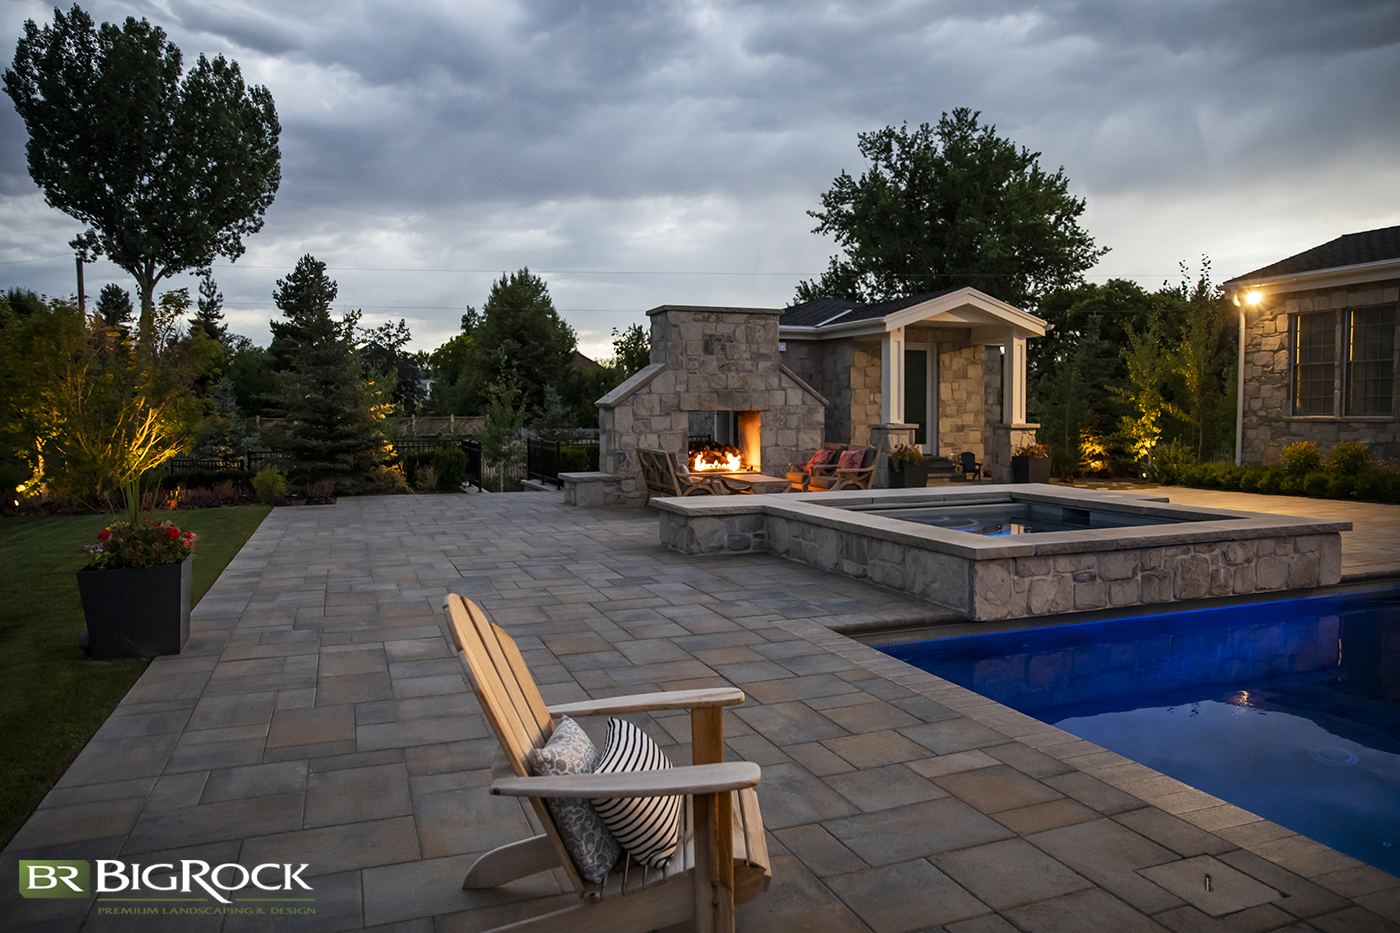 If your landscape design includes an inground pool, create a beautiful hardscape design to complete your pool. With the right cement, stone, or the perfectly chosen hardscape material, you can add beauty and texture to your backyard landscape and pool patio.